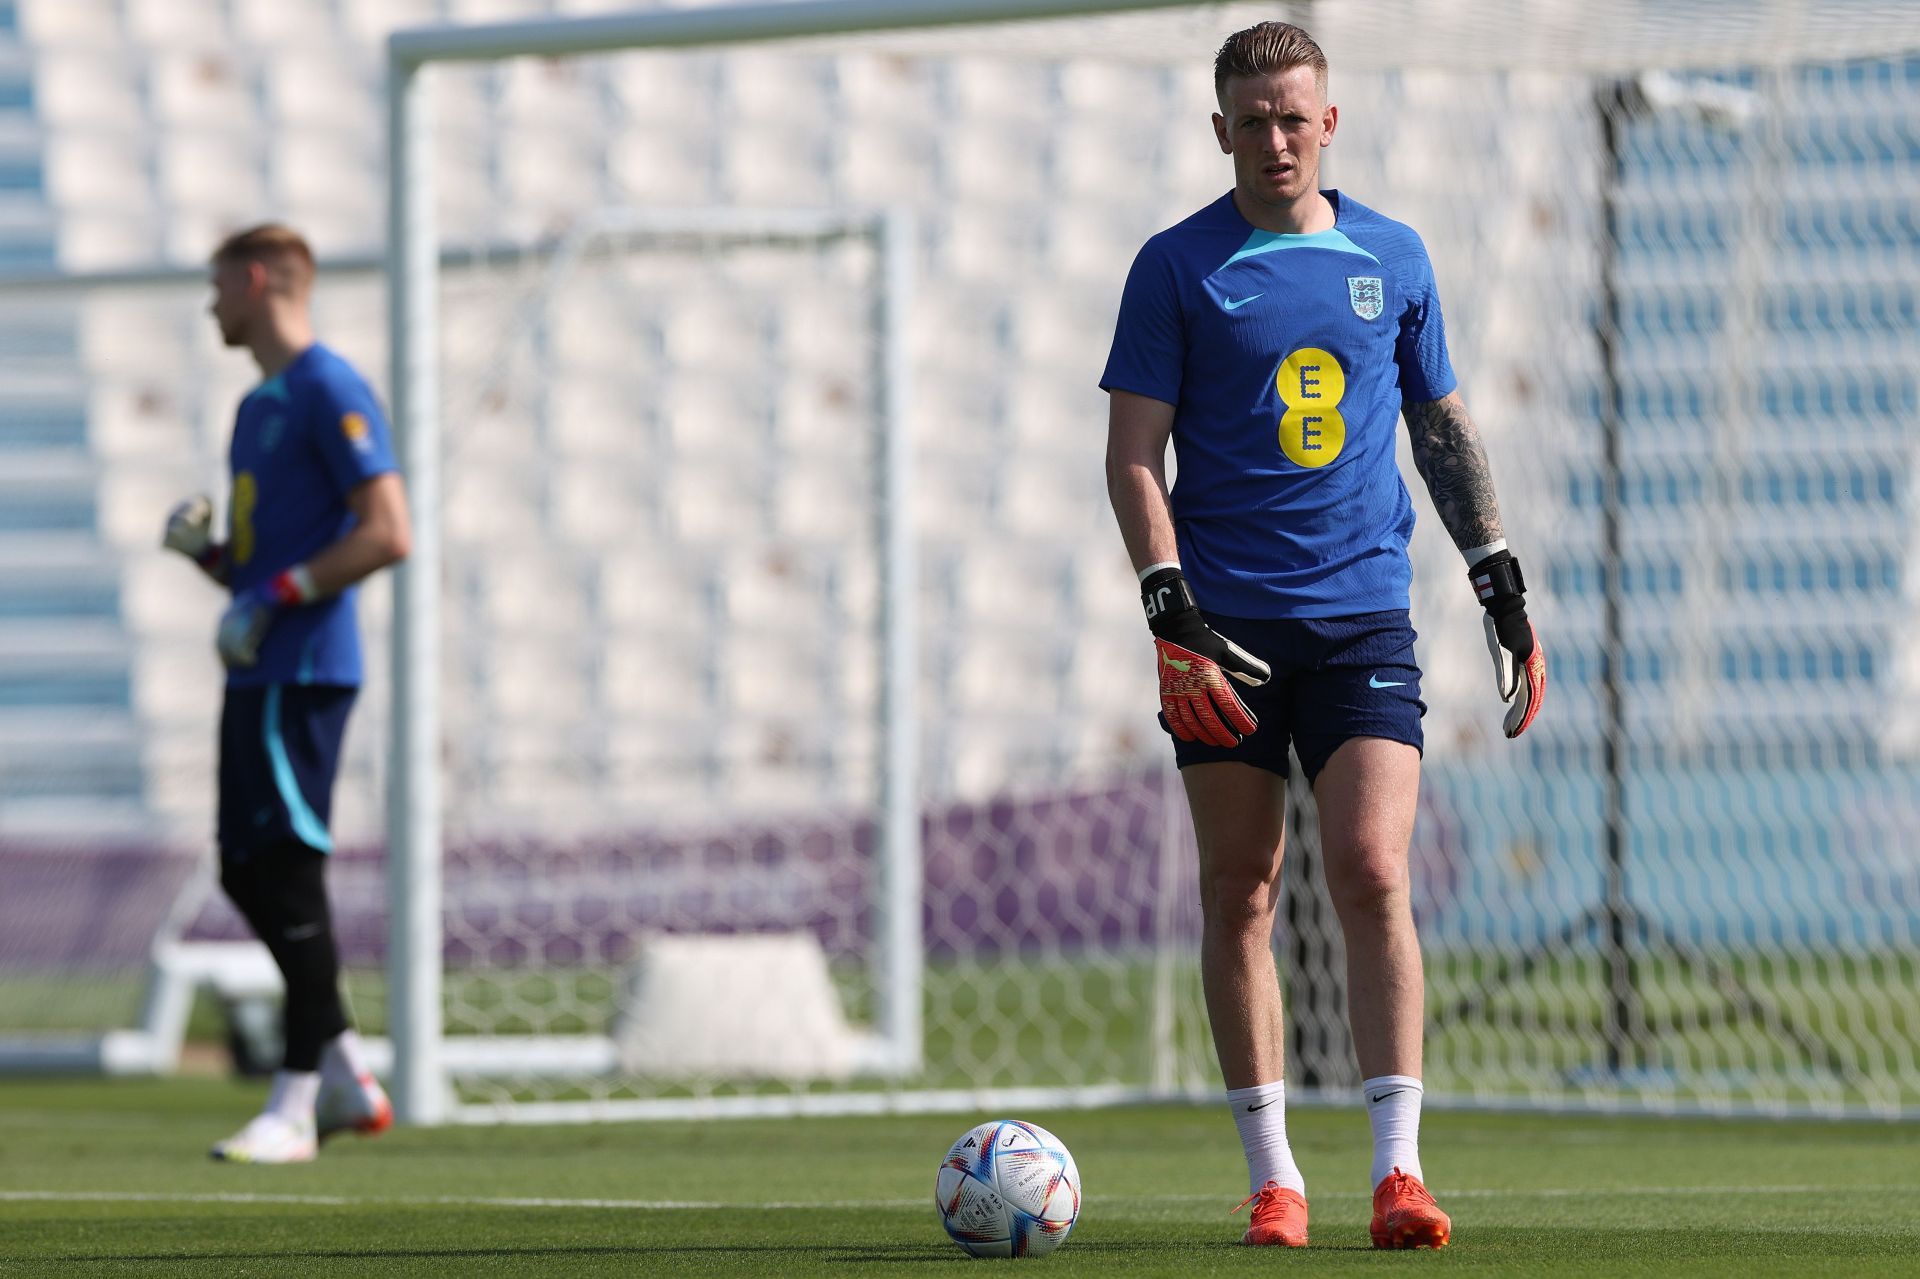 Pickford is a man of interest for the Blues